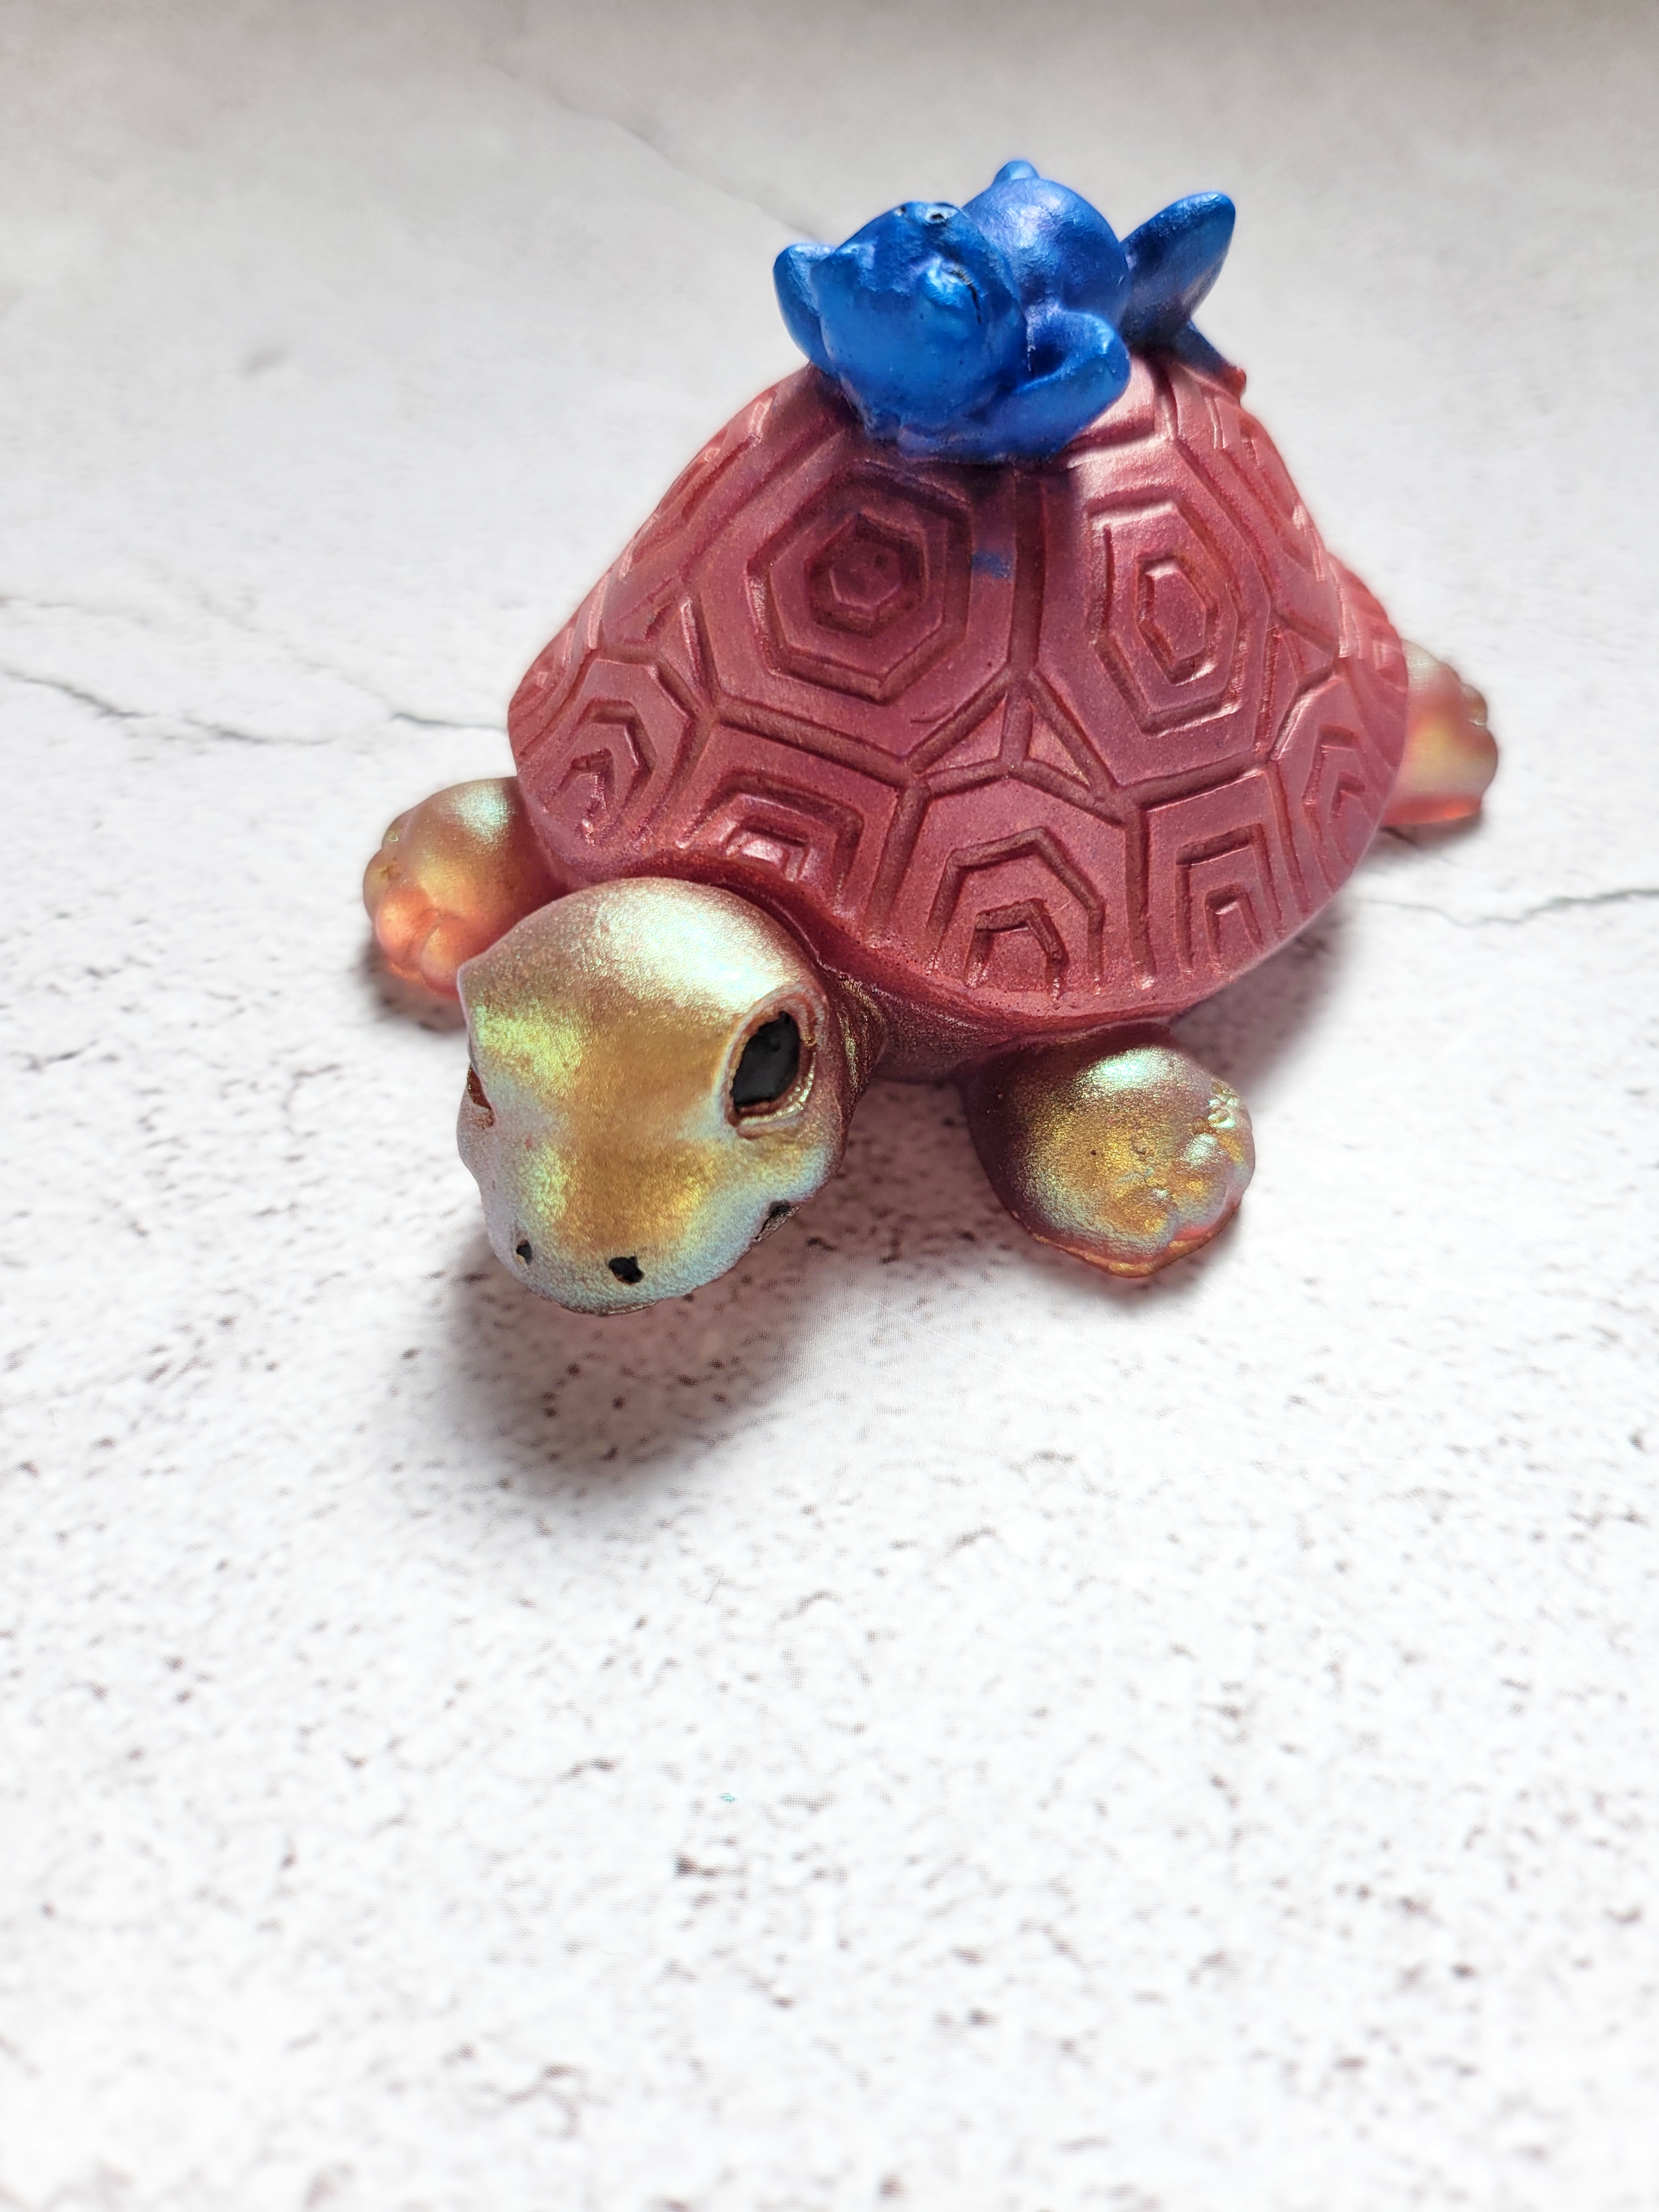 A front view of a turtle figure with a blue frog lounging on top of its shell. The turtle is gold with a reddish shell, with black eyes and nostrils.